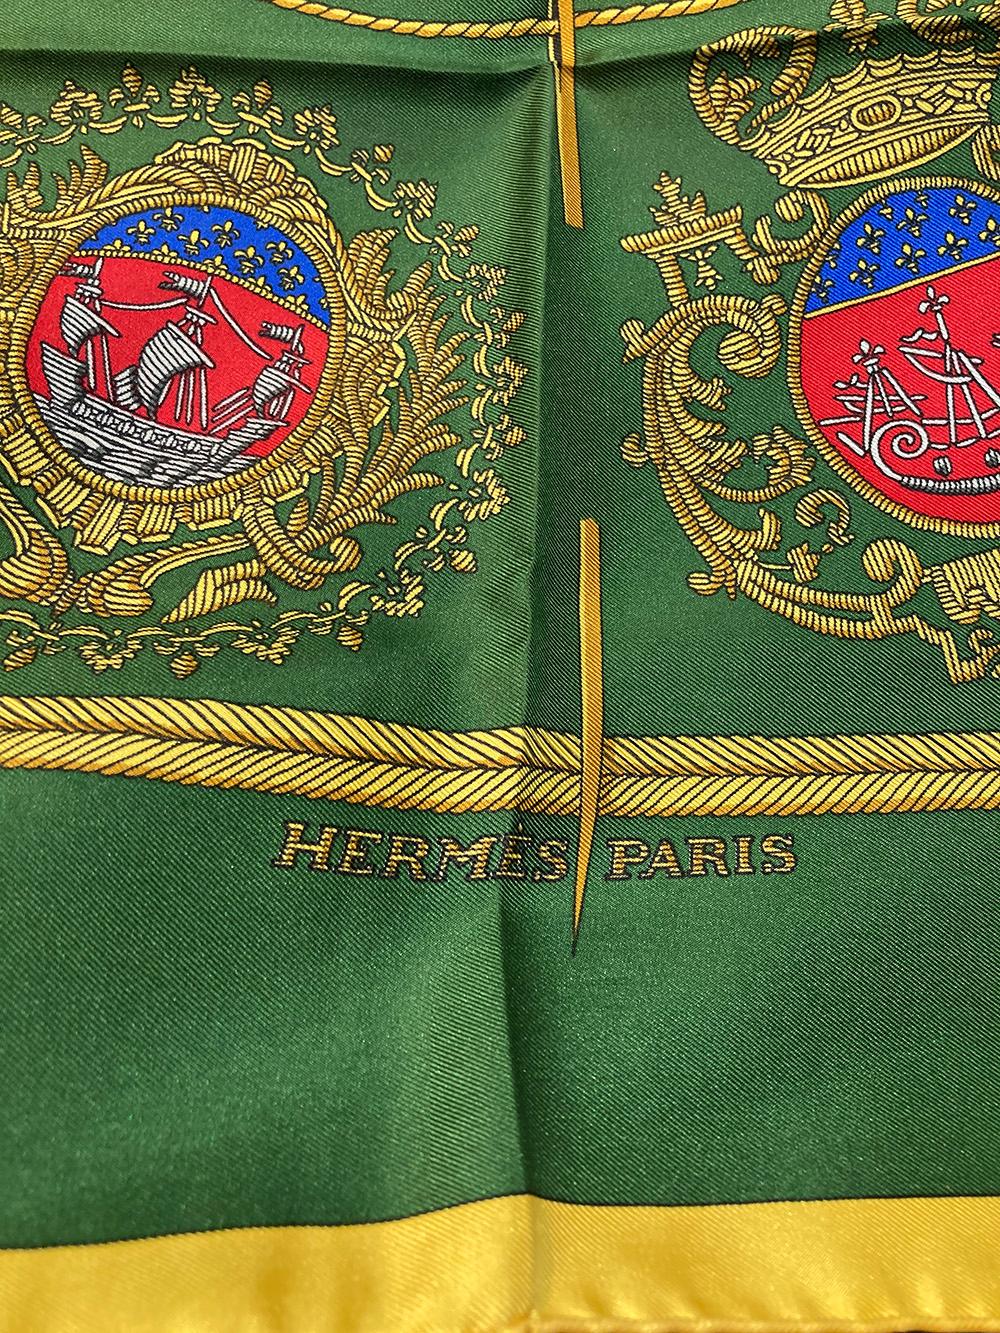 Hermes Vintage Les Armes de Paris Silk Scarf c1950s in excellent condition. Original silk screen design c1954 by Hugo Grygkar features the various coat of arms of France in blue red and grey surrounded by gold ornate filagree borders over a green